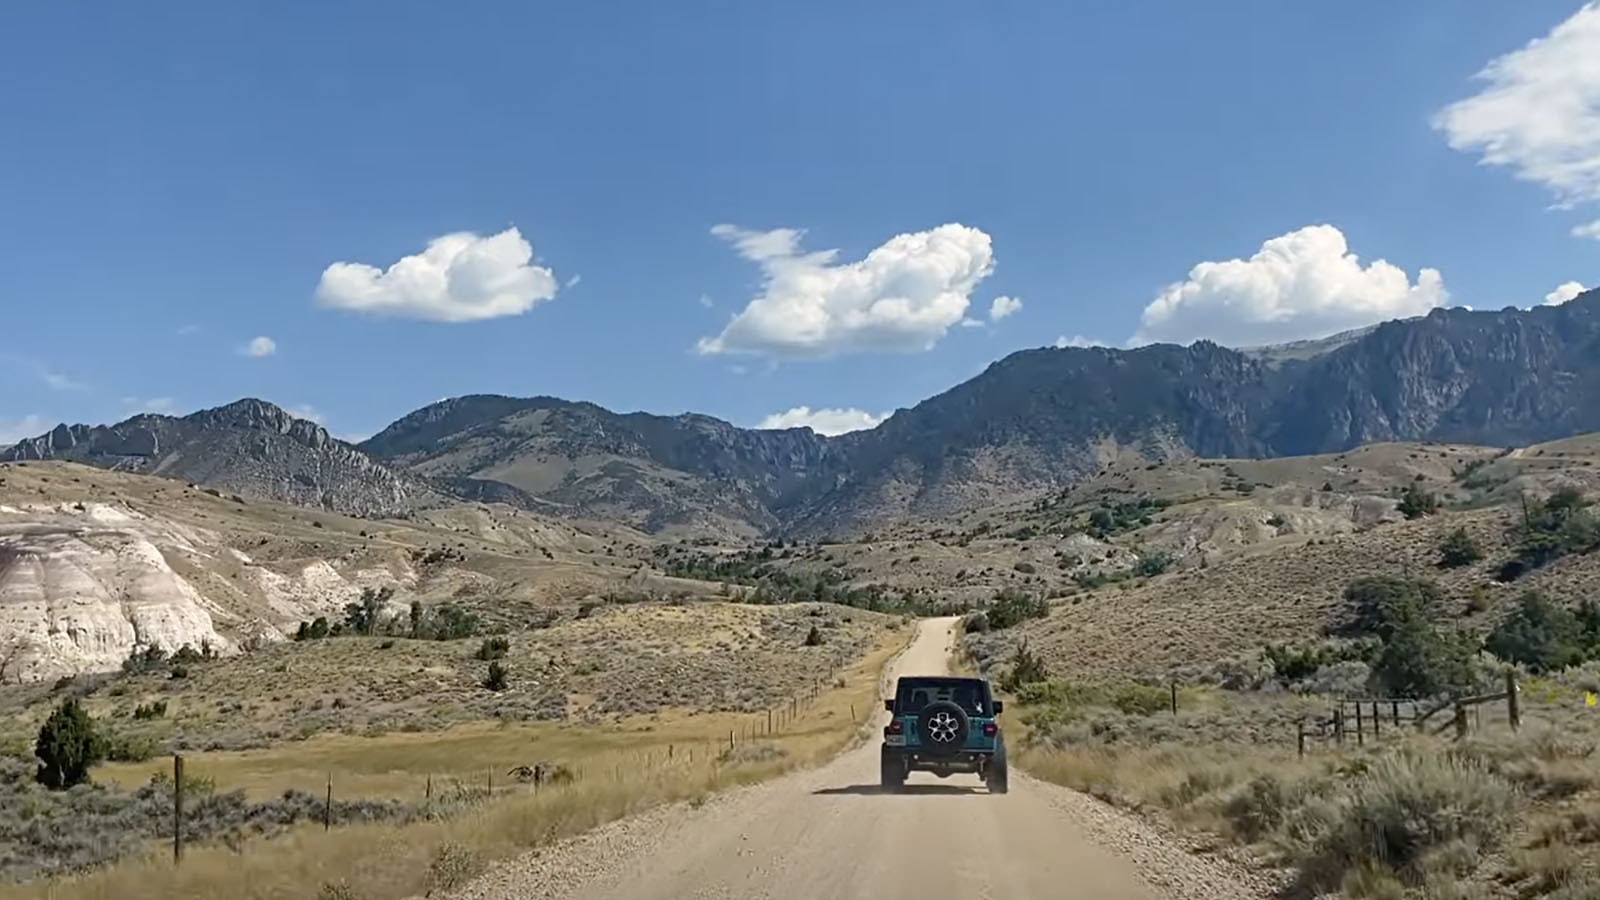 Open road ahead jeeping in Wyoming.